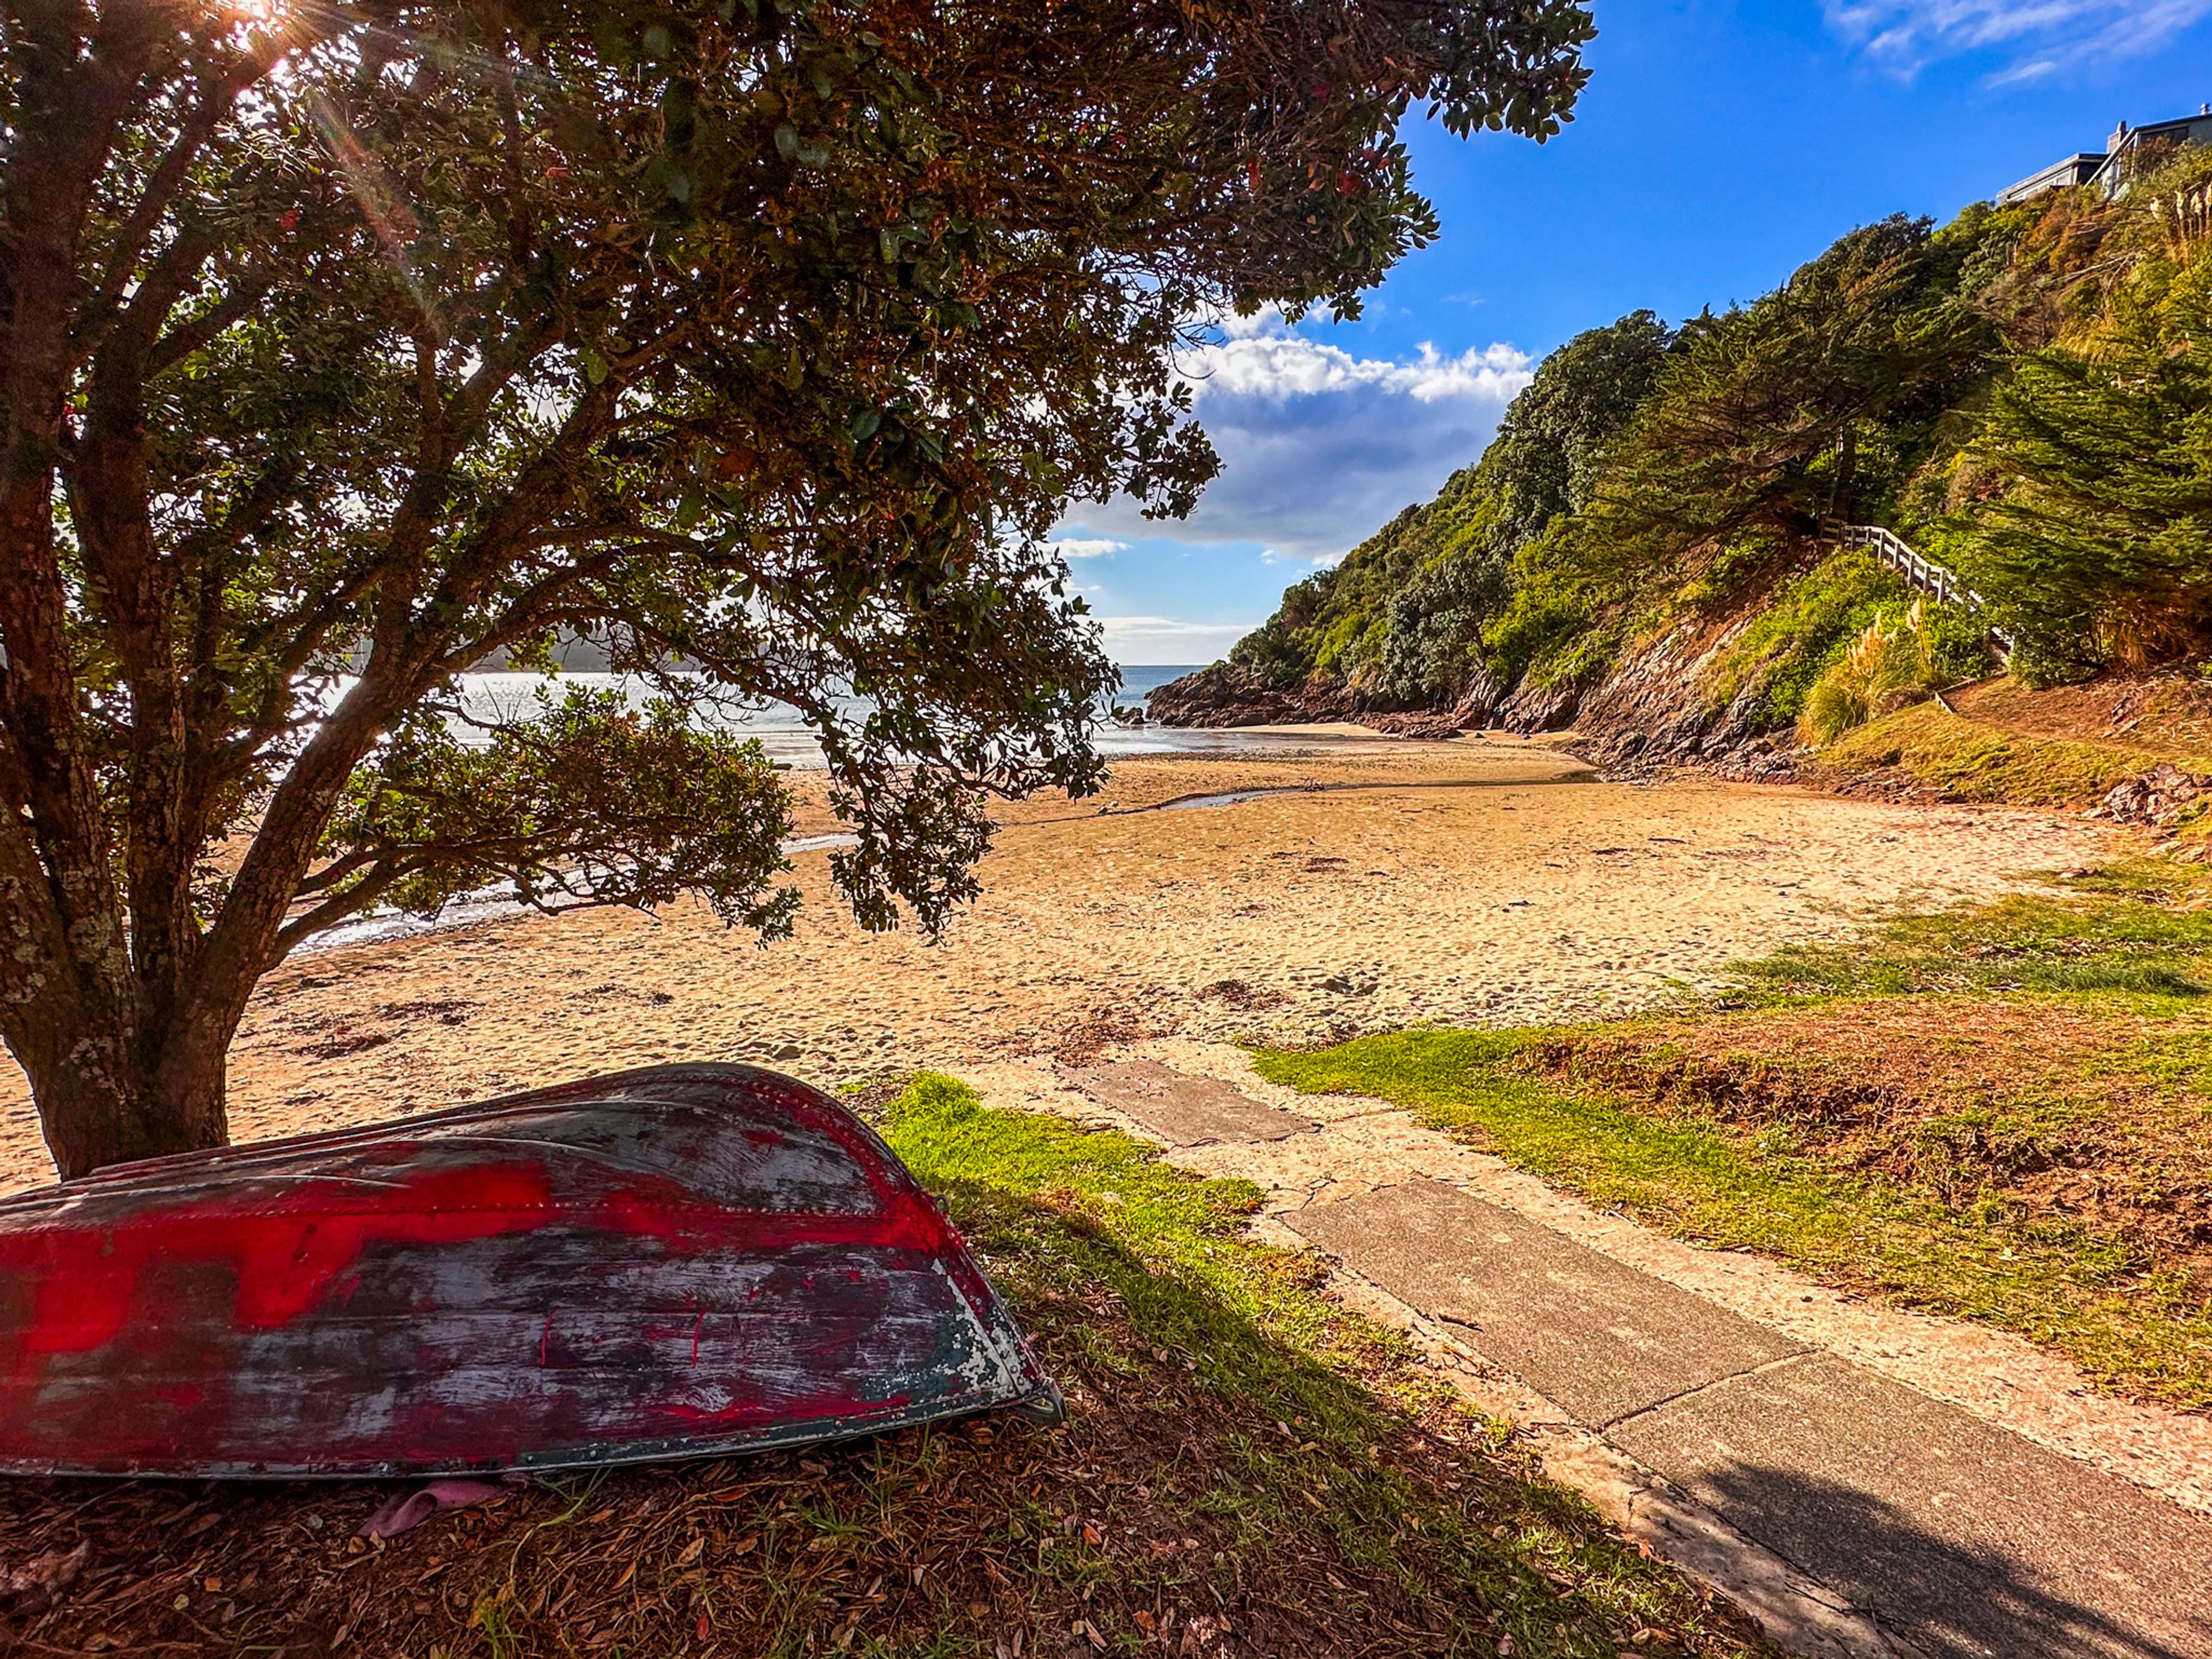 A upturned dinghy under a tree at Little Oneroa Beach